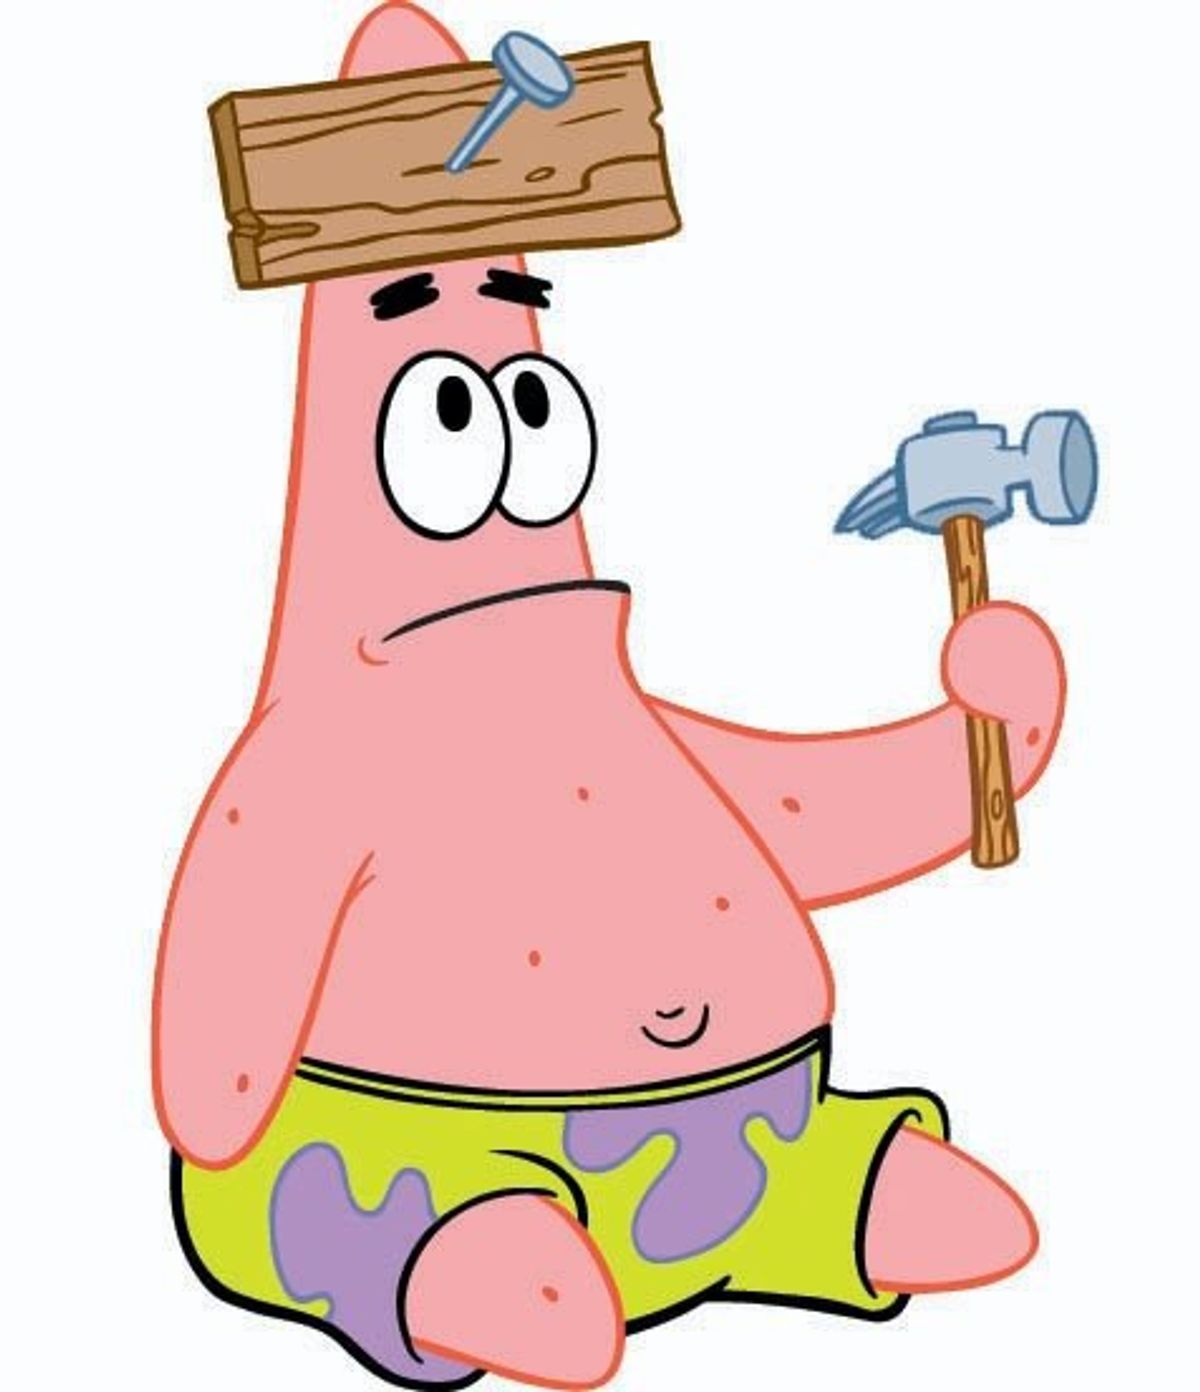 11 Times When Patrick Star Nailed The Life Of A College Student